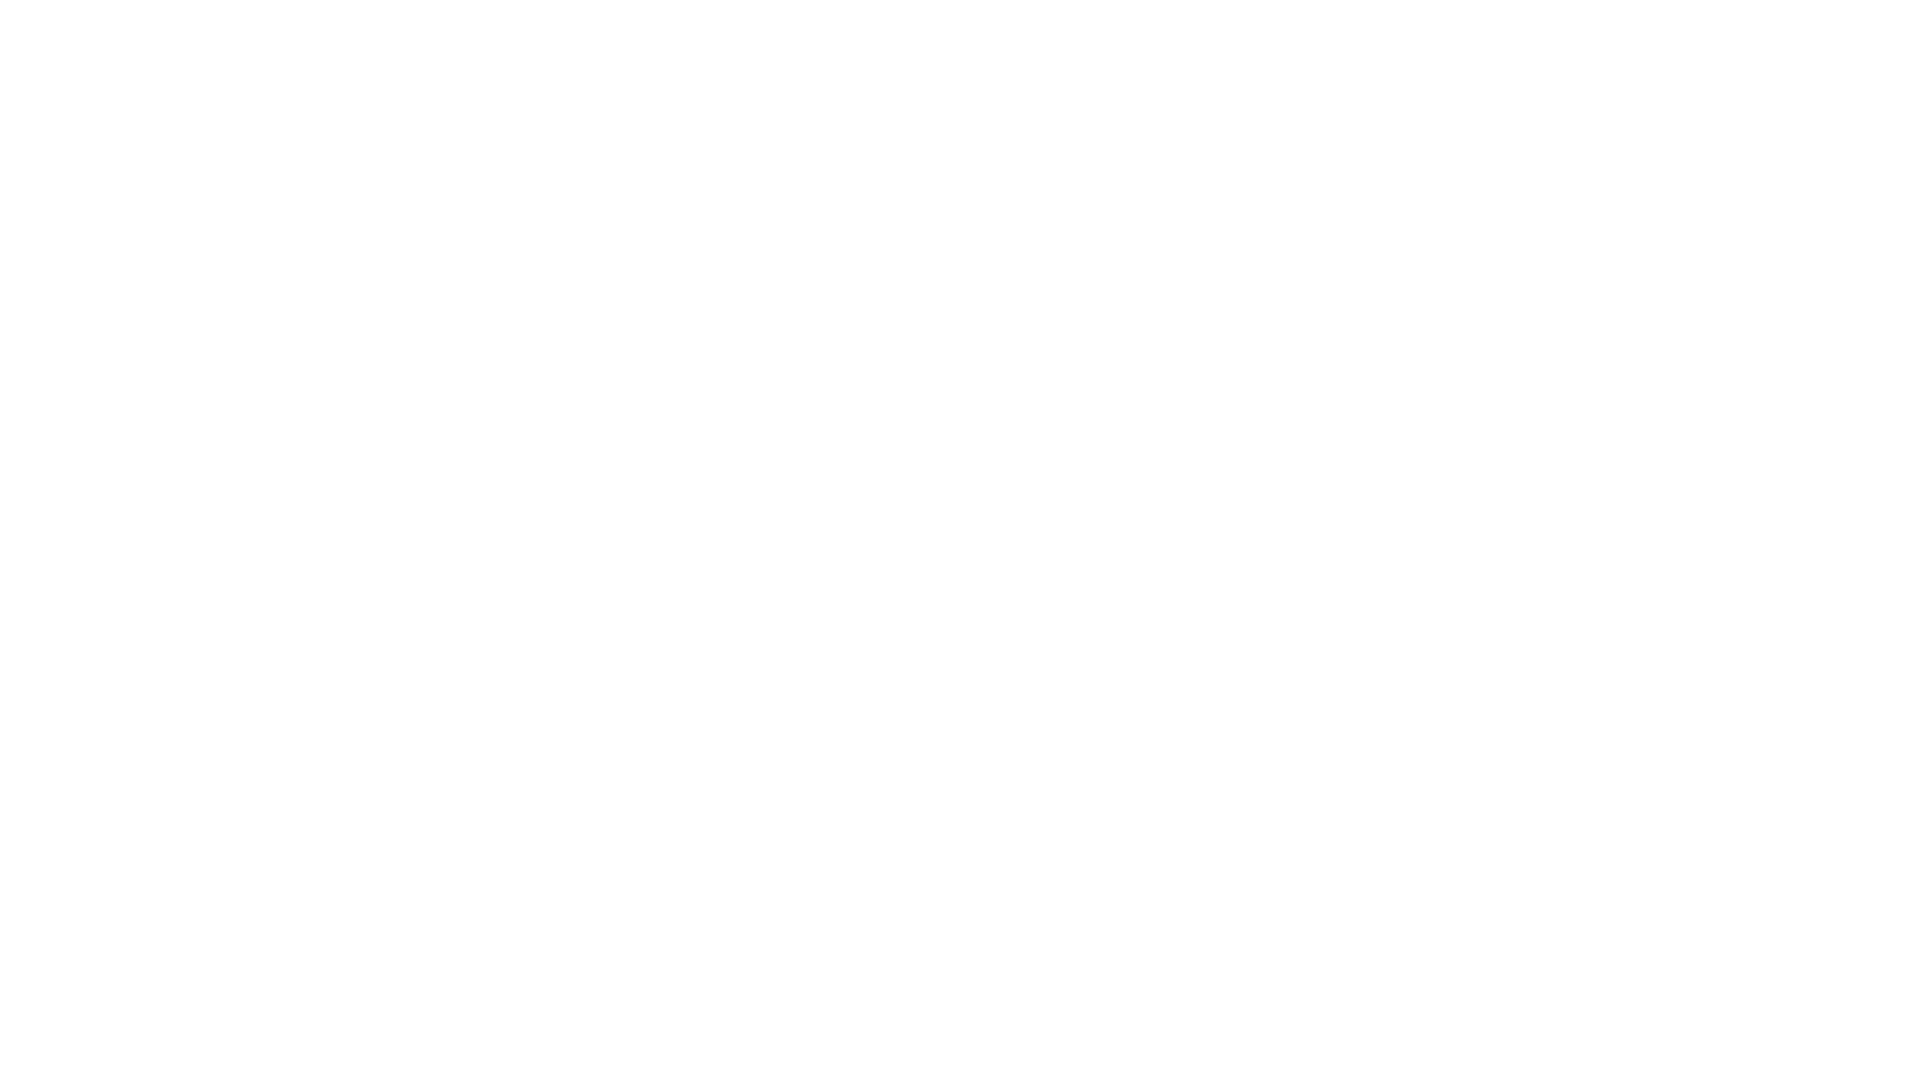 what is the walking dead theme song called